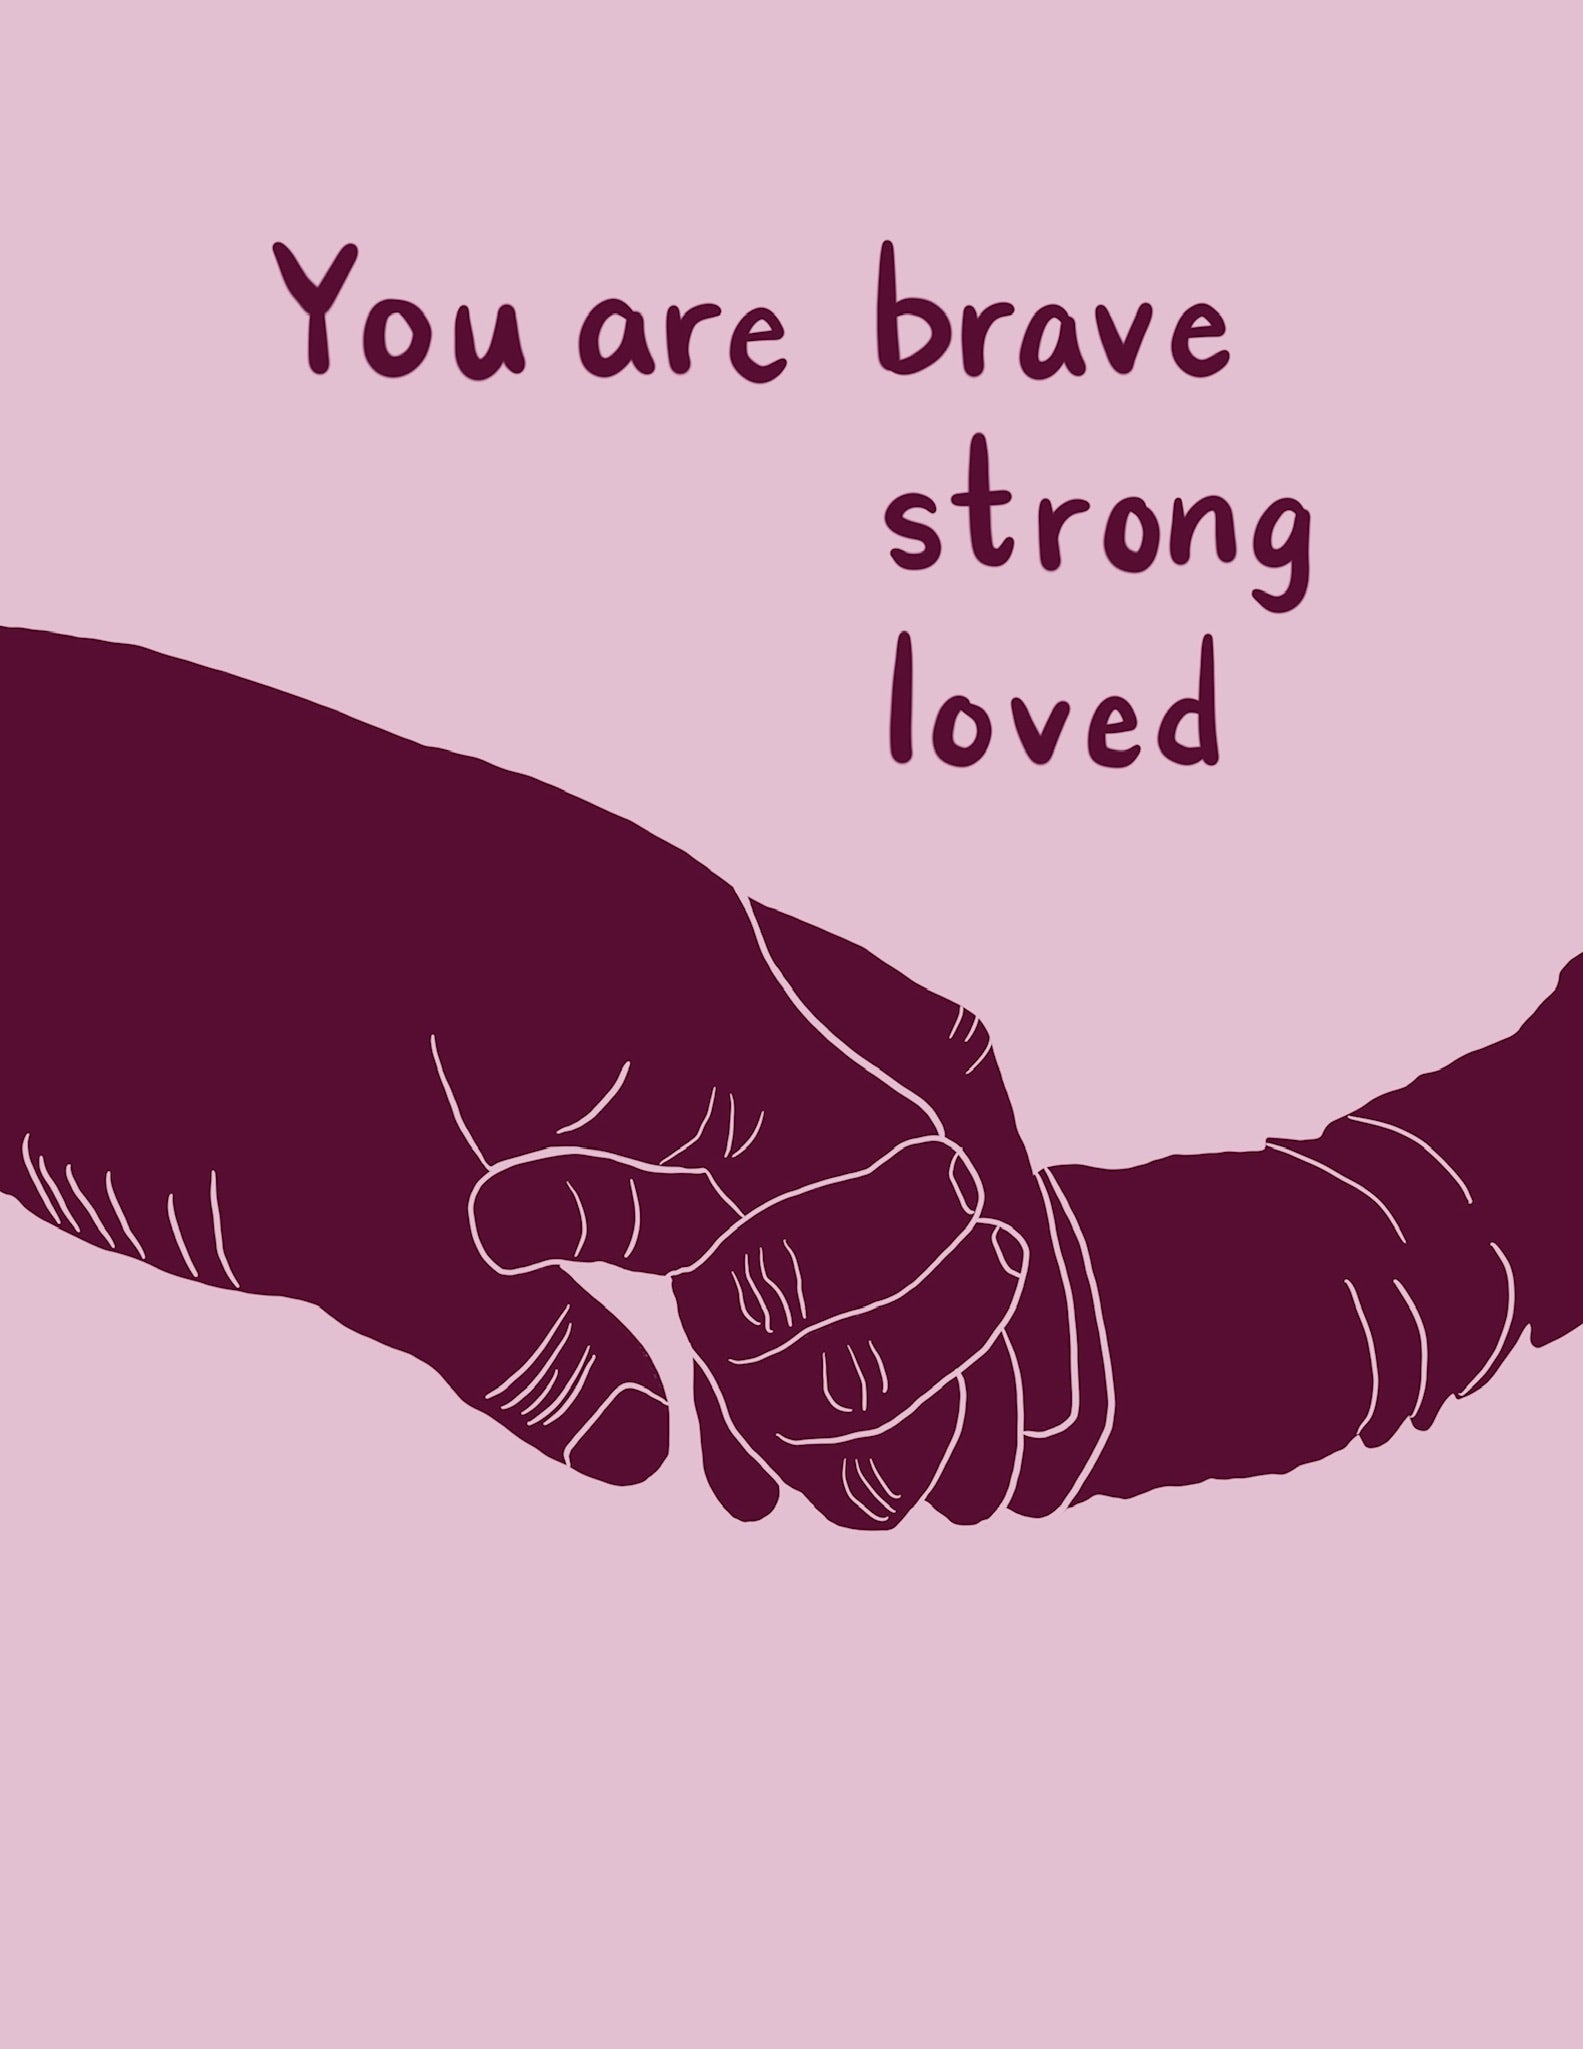 Brave. Strong. Loved.